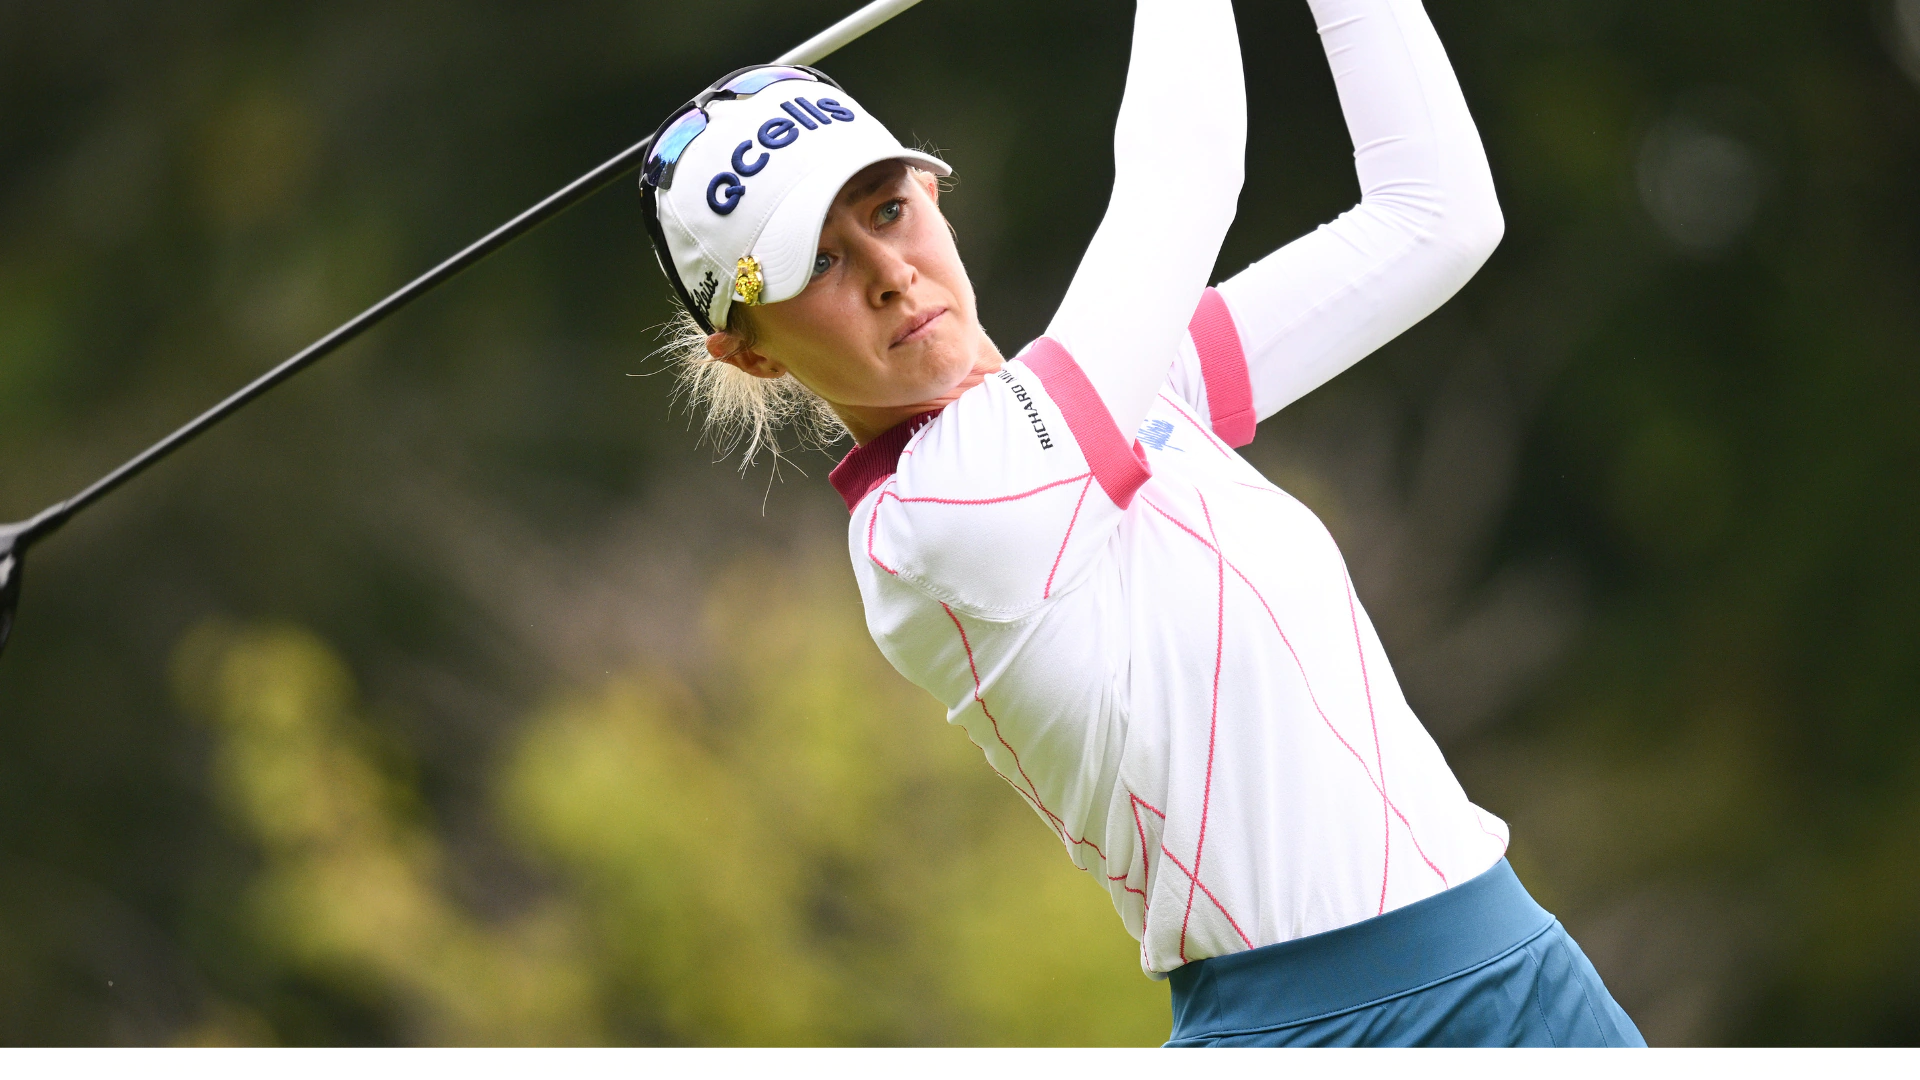 In hopes of Sunday 2022 Evian Championship comeback, Nelly Korda will try to get ‘s*** back together’